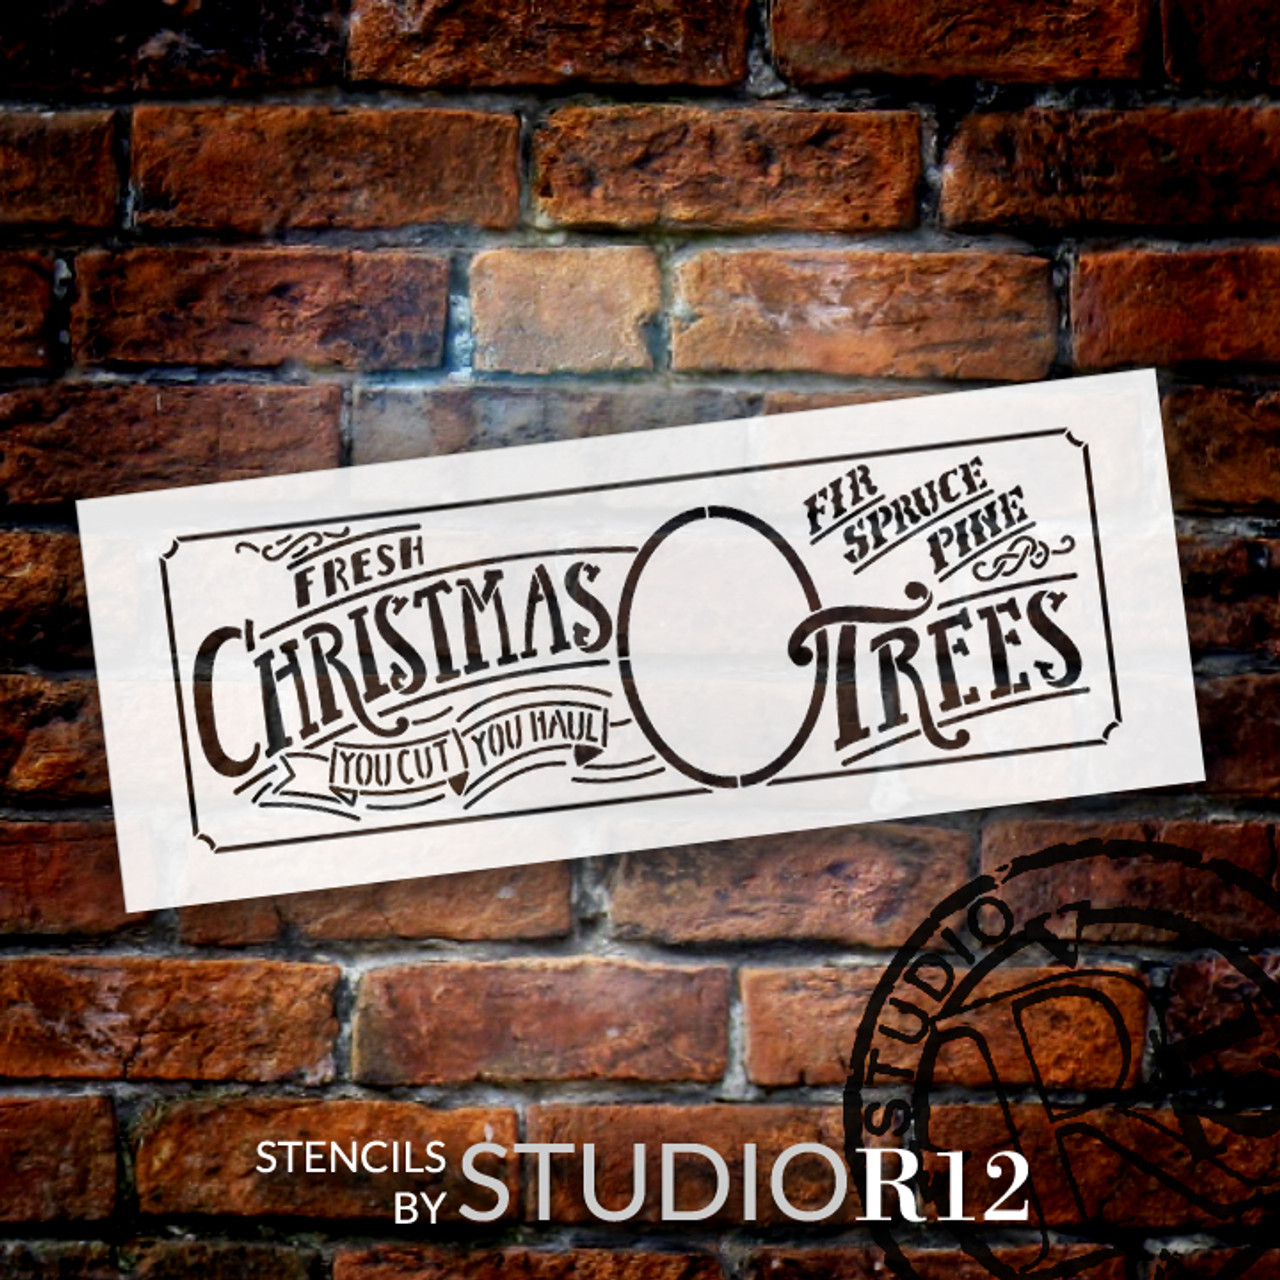 Fresh Christmas Trees - Word and Art Stencil - 13" x 5" - STCL1343_1 by StudioR12